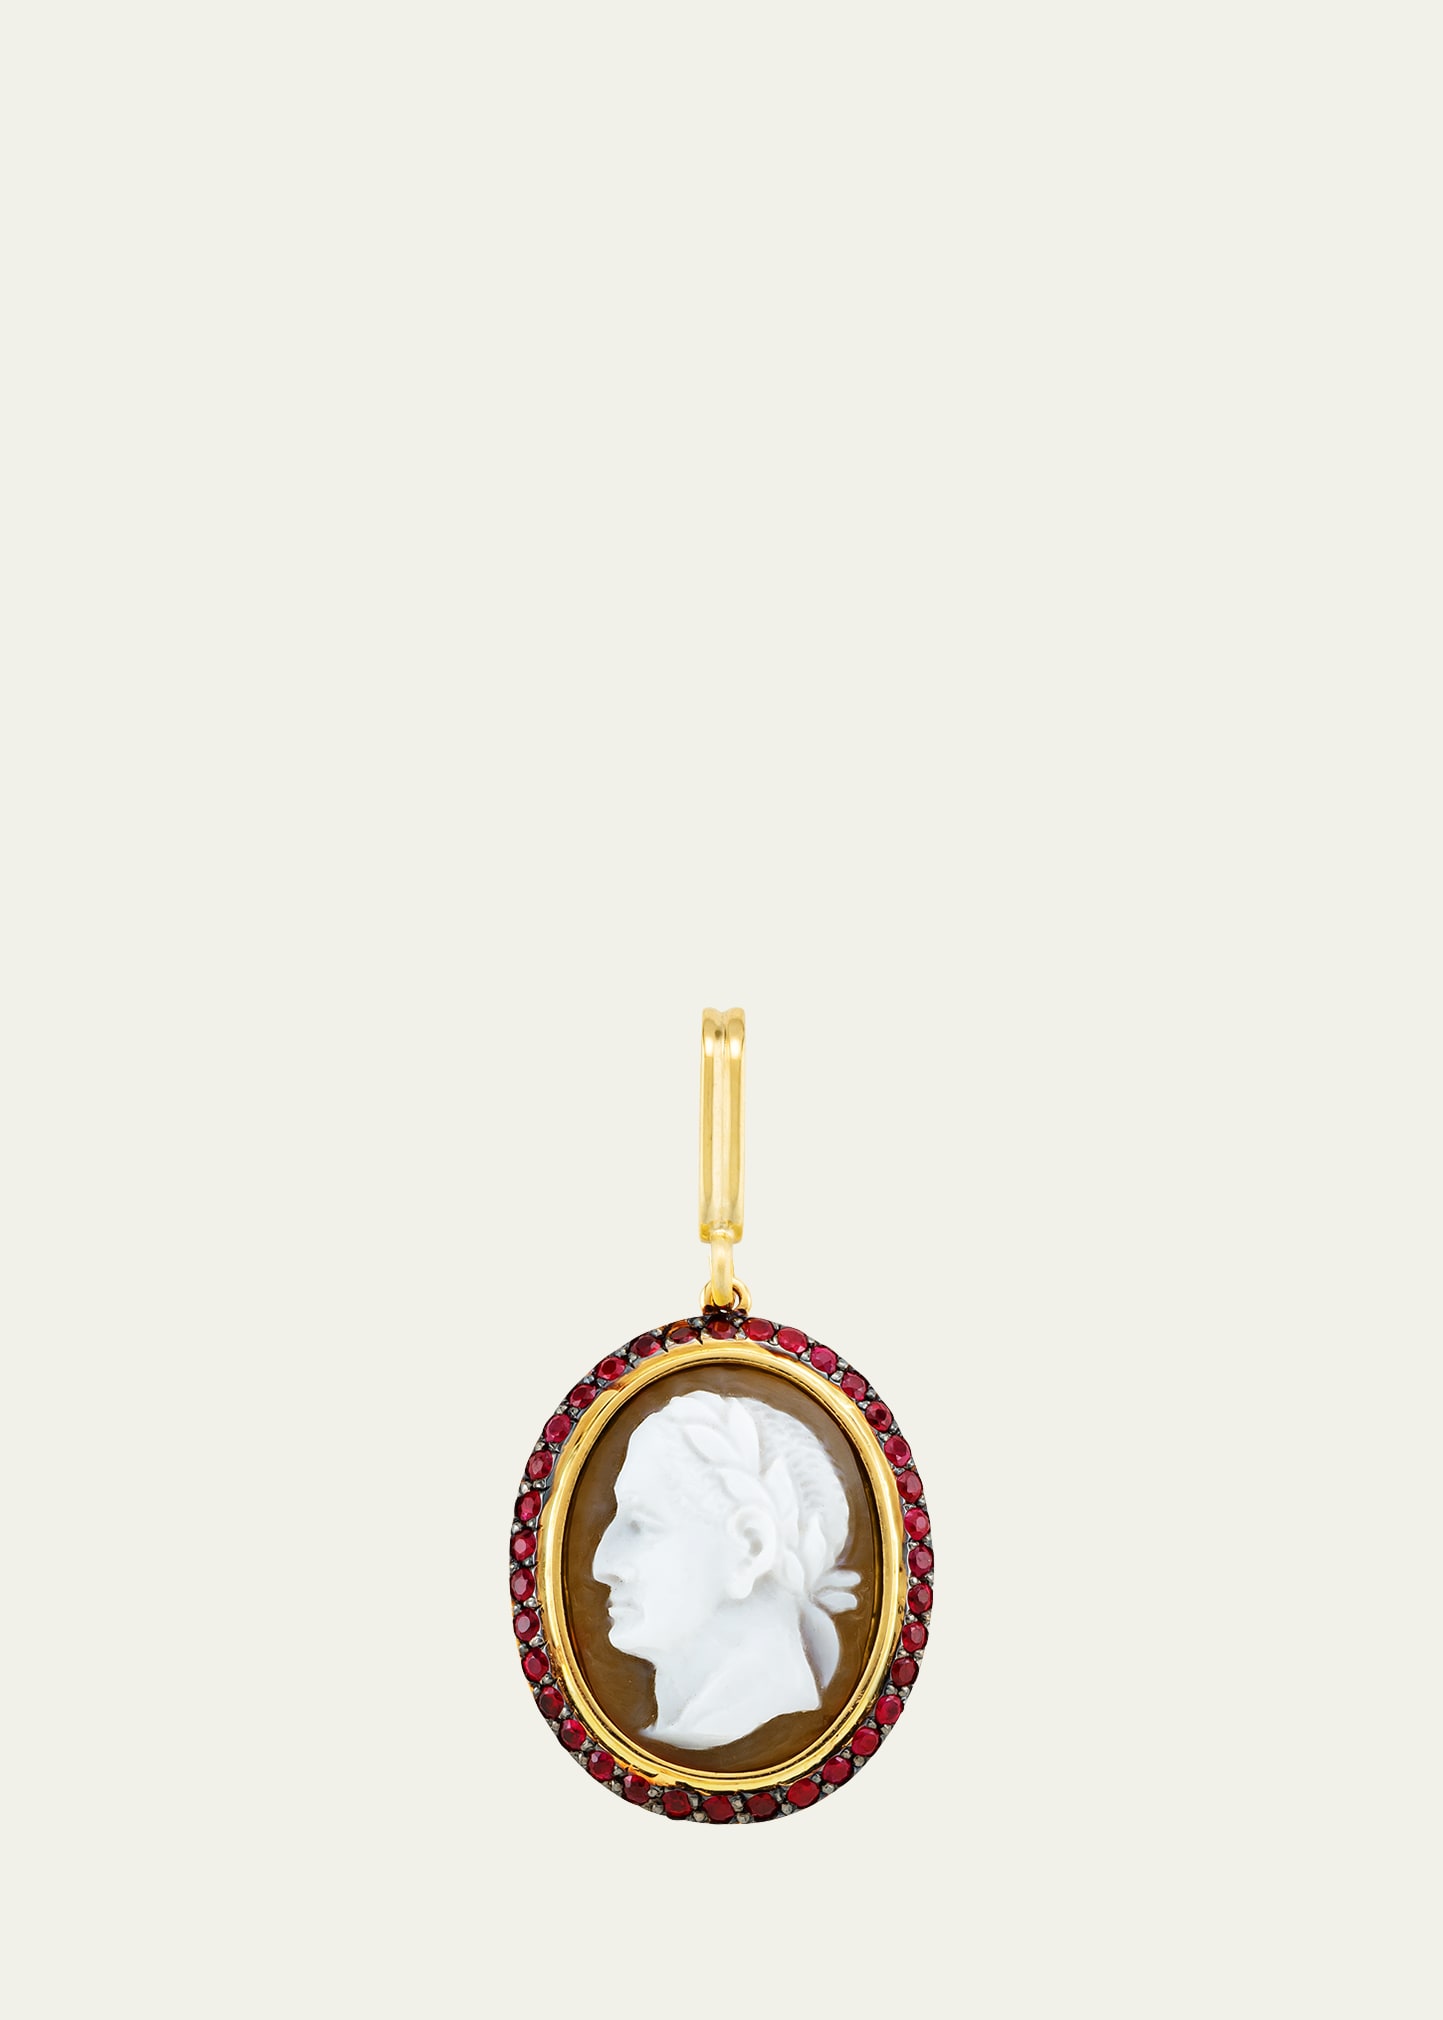 Mellerio 18k Yellow Gold Precious Cameo Charm With Shell And Rubies